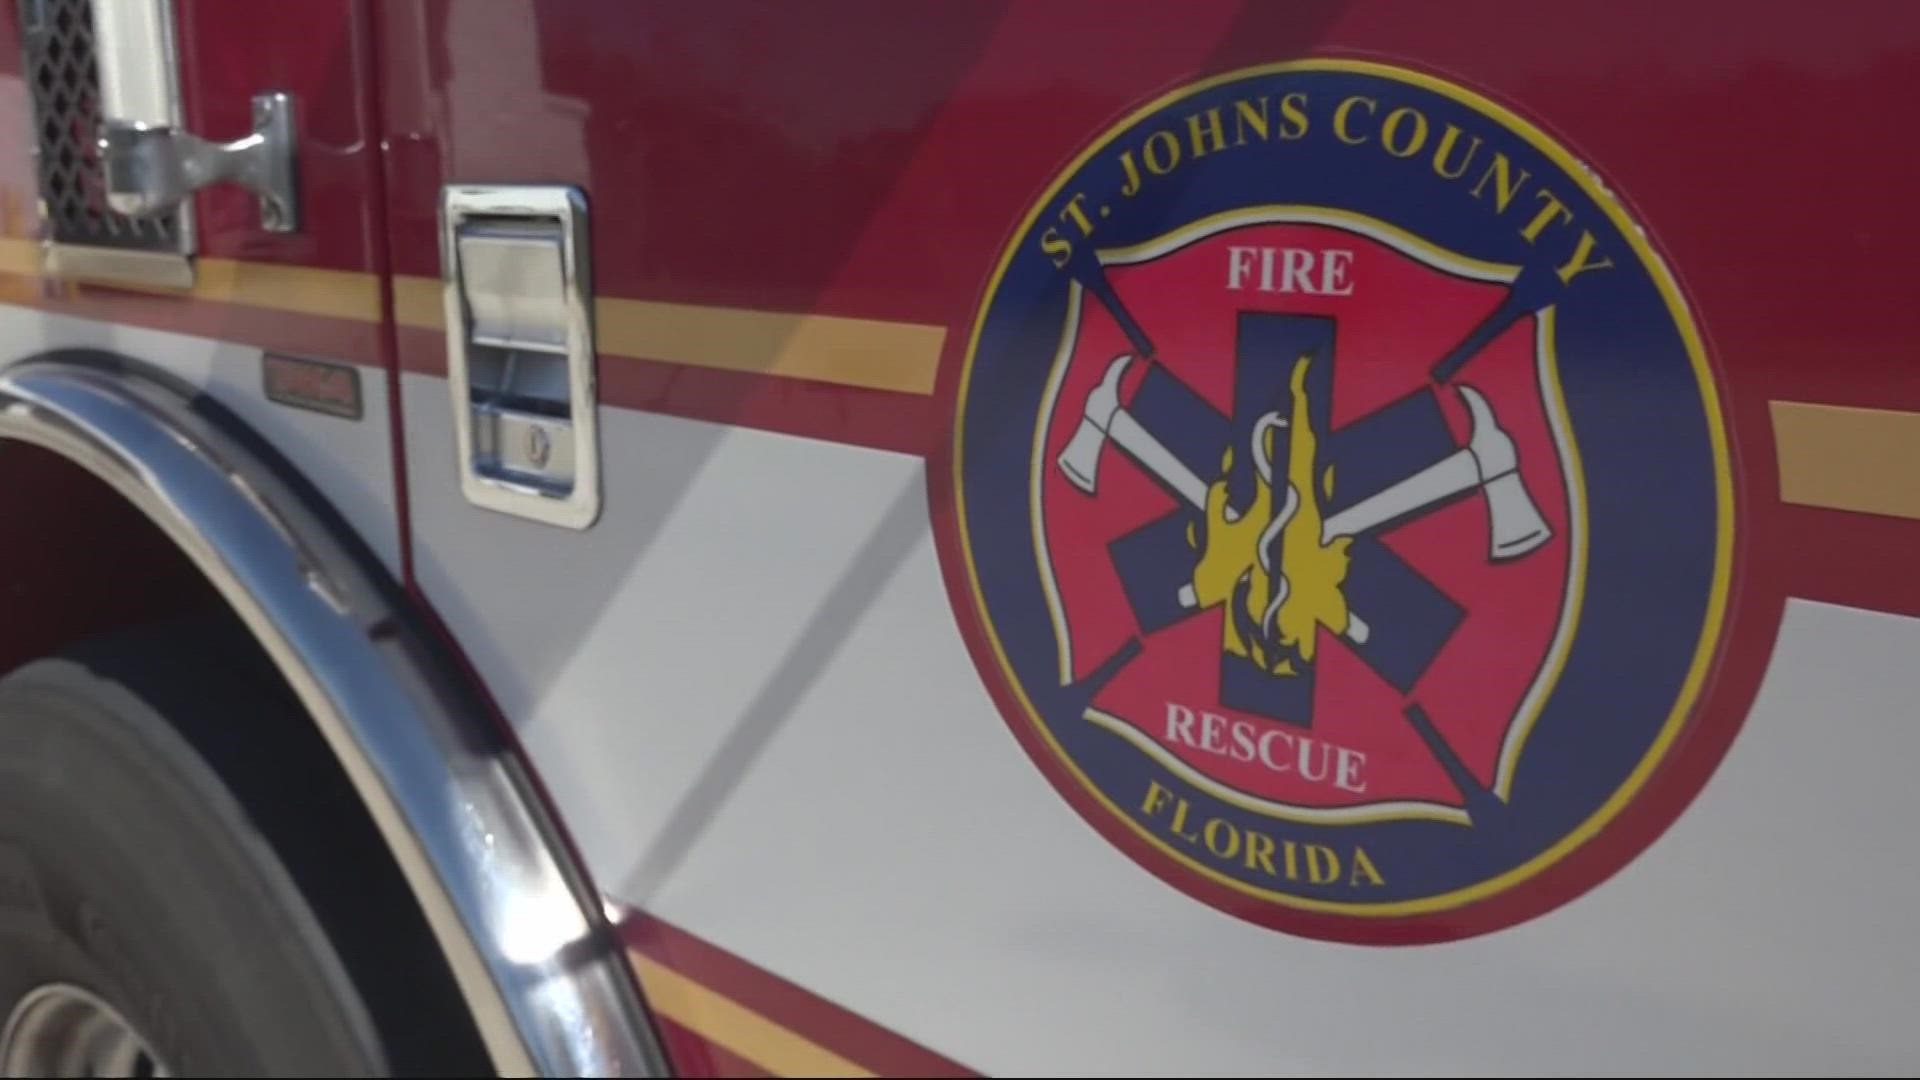 $500,000 was approved for St. Johns County Fire & Rescue for mental health resources.